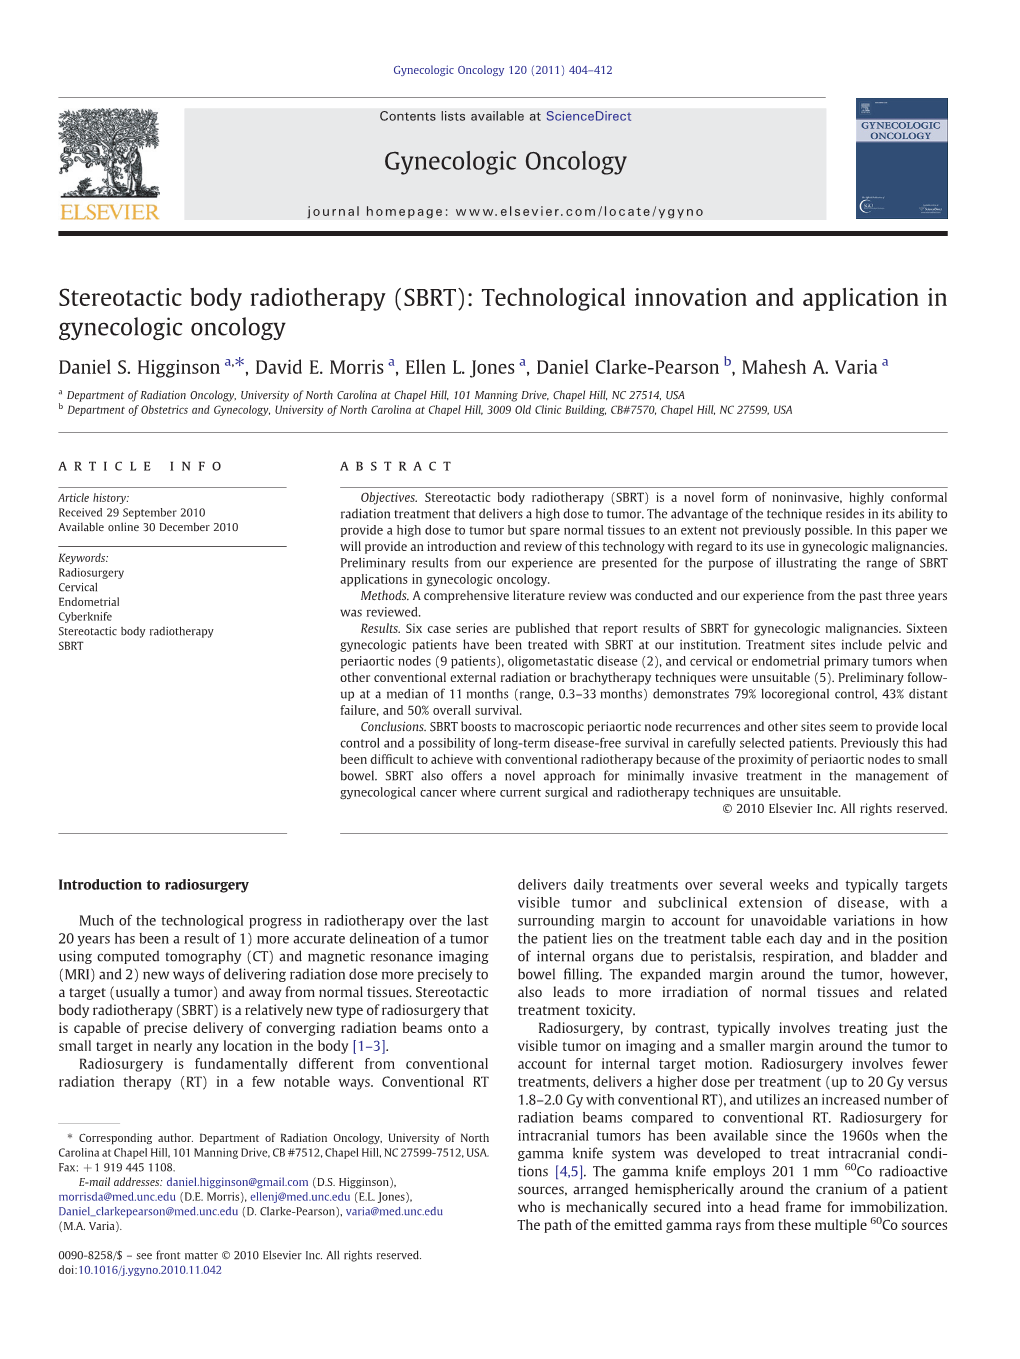 SBRT): Technological Innovation and Application in Gynecologic Oncology